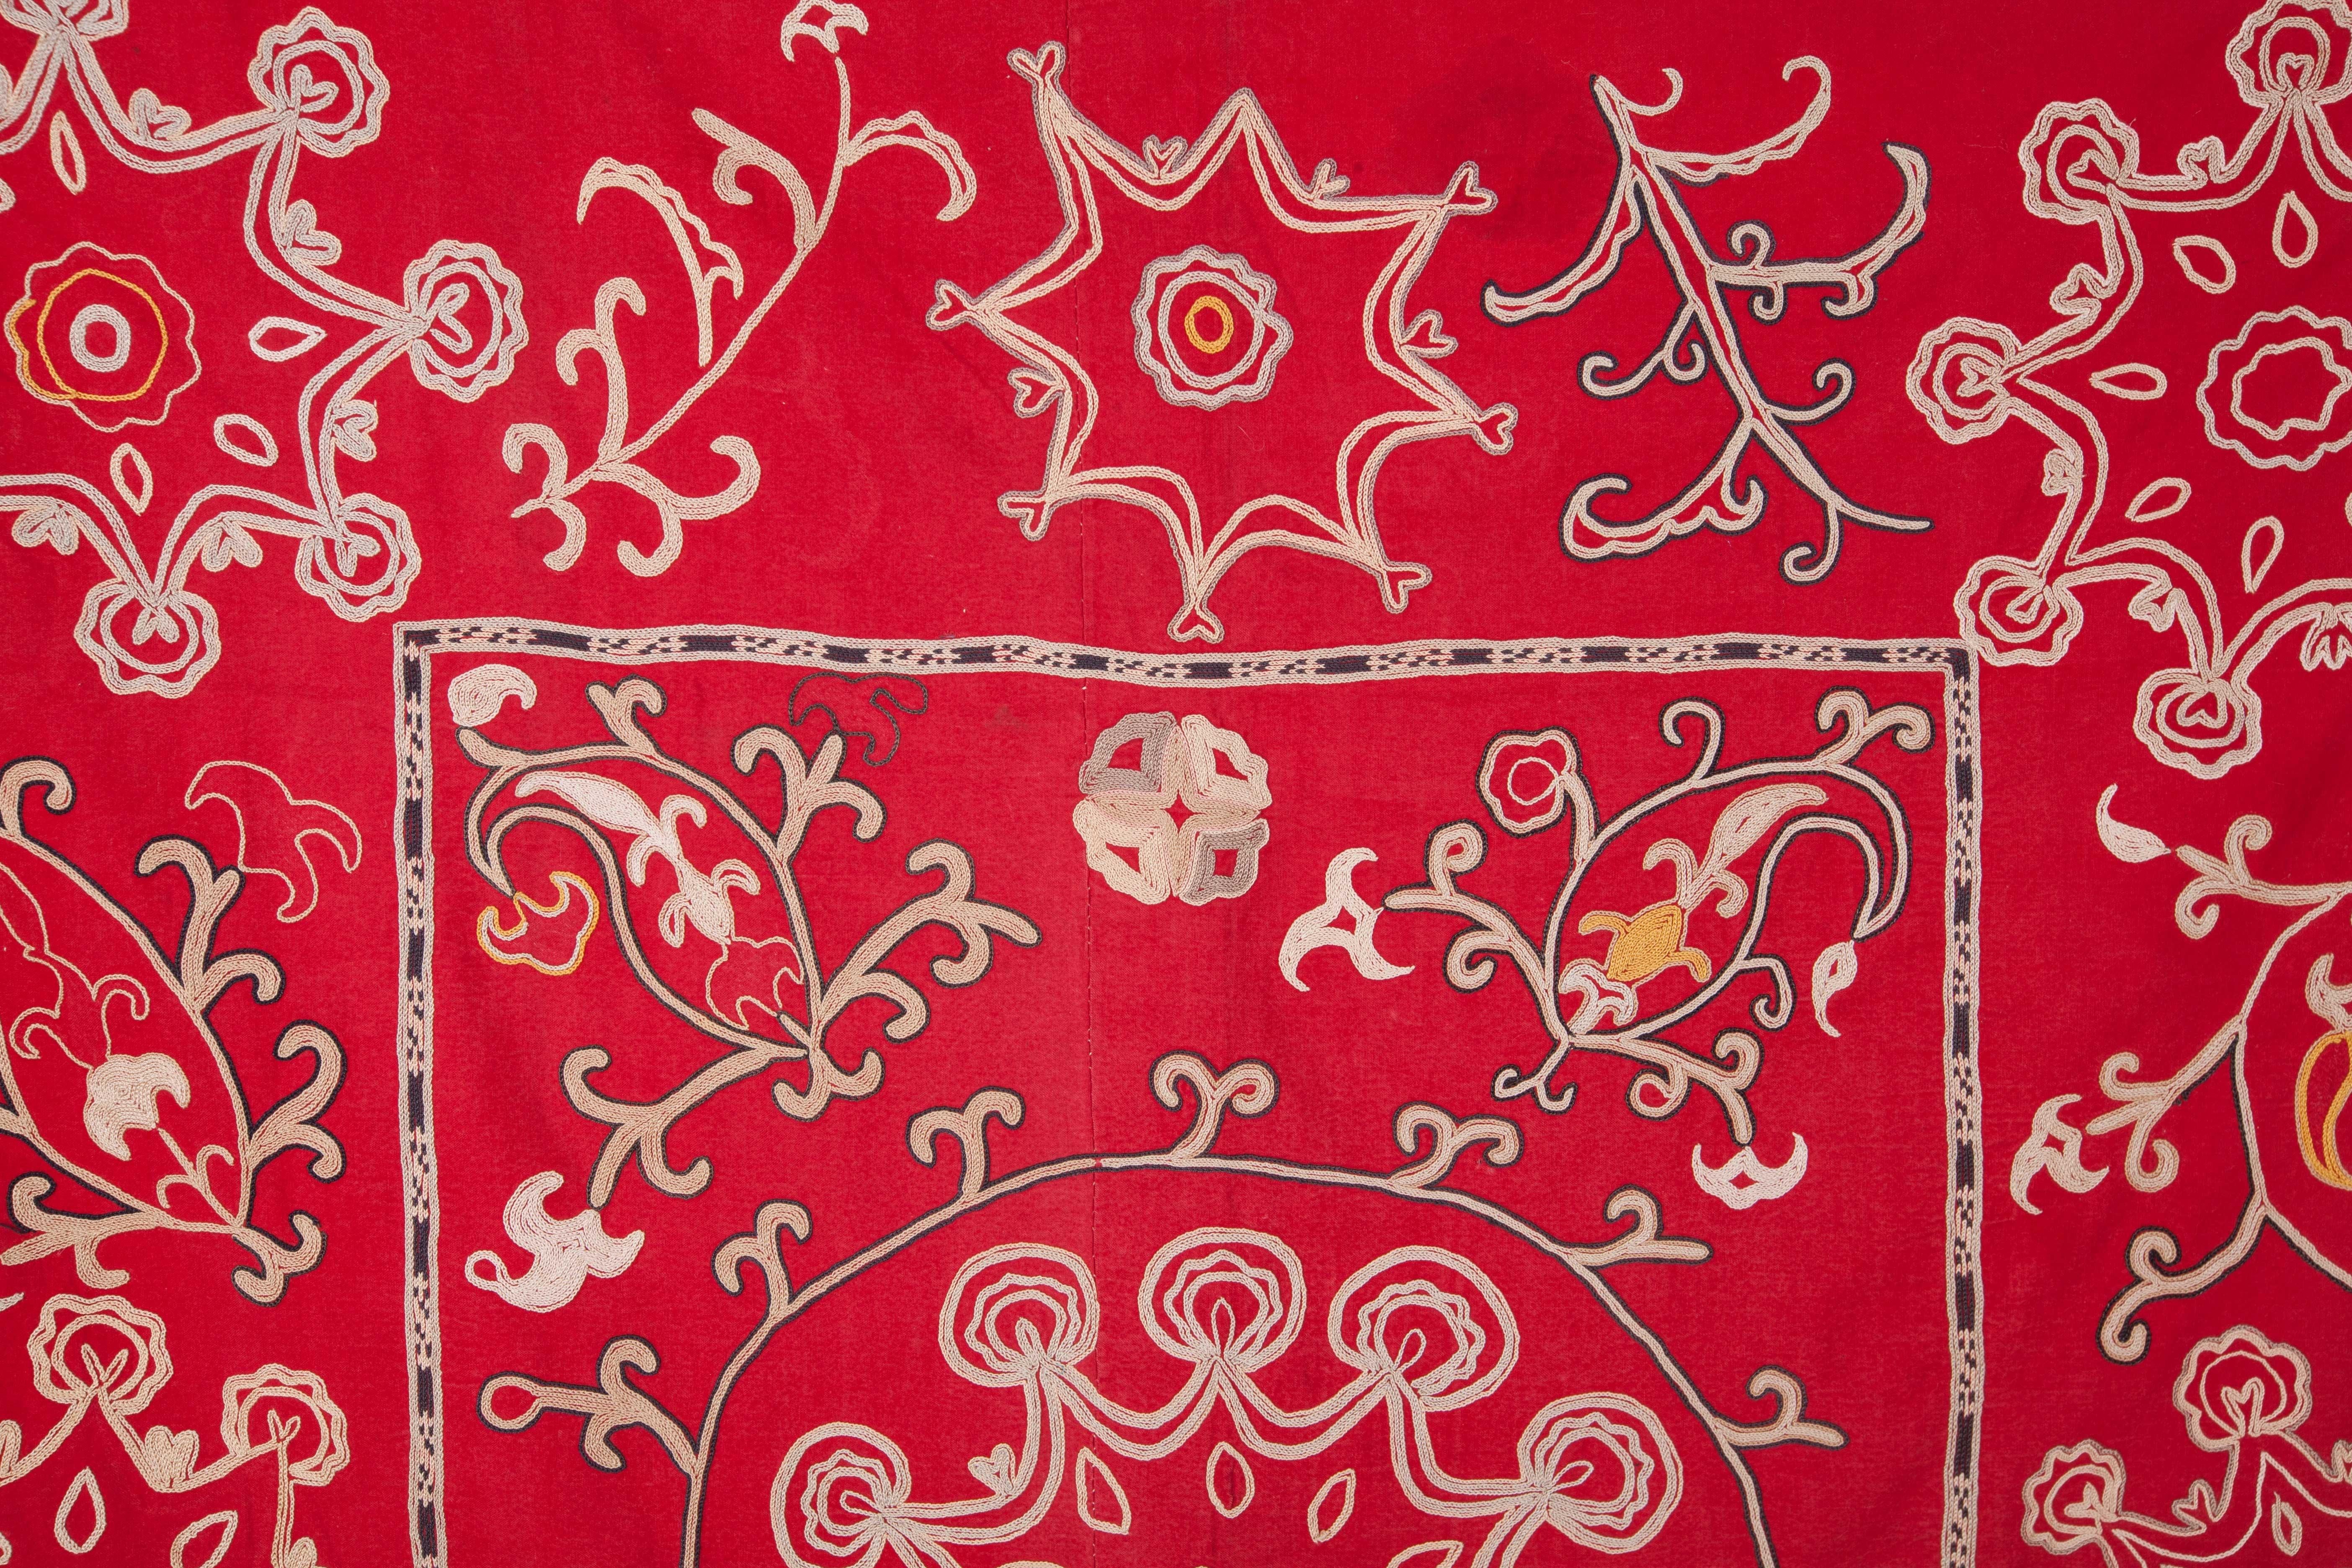 Embroidered Lakai Suzani from Uzbekistan, Central Asia, Early 20th Century For Sale